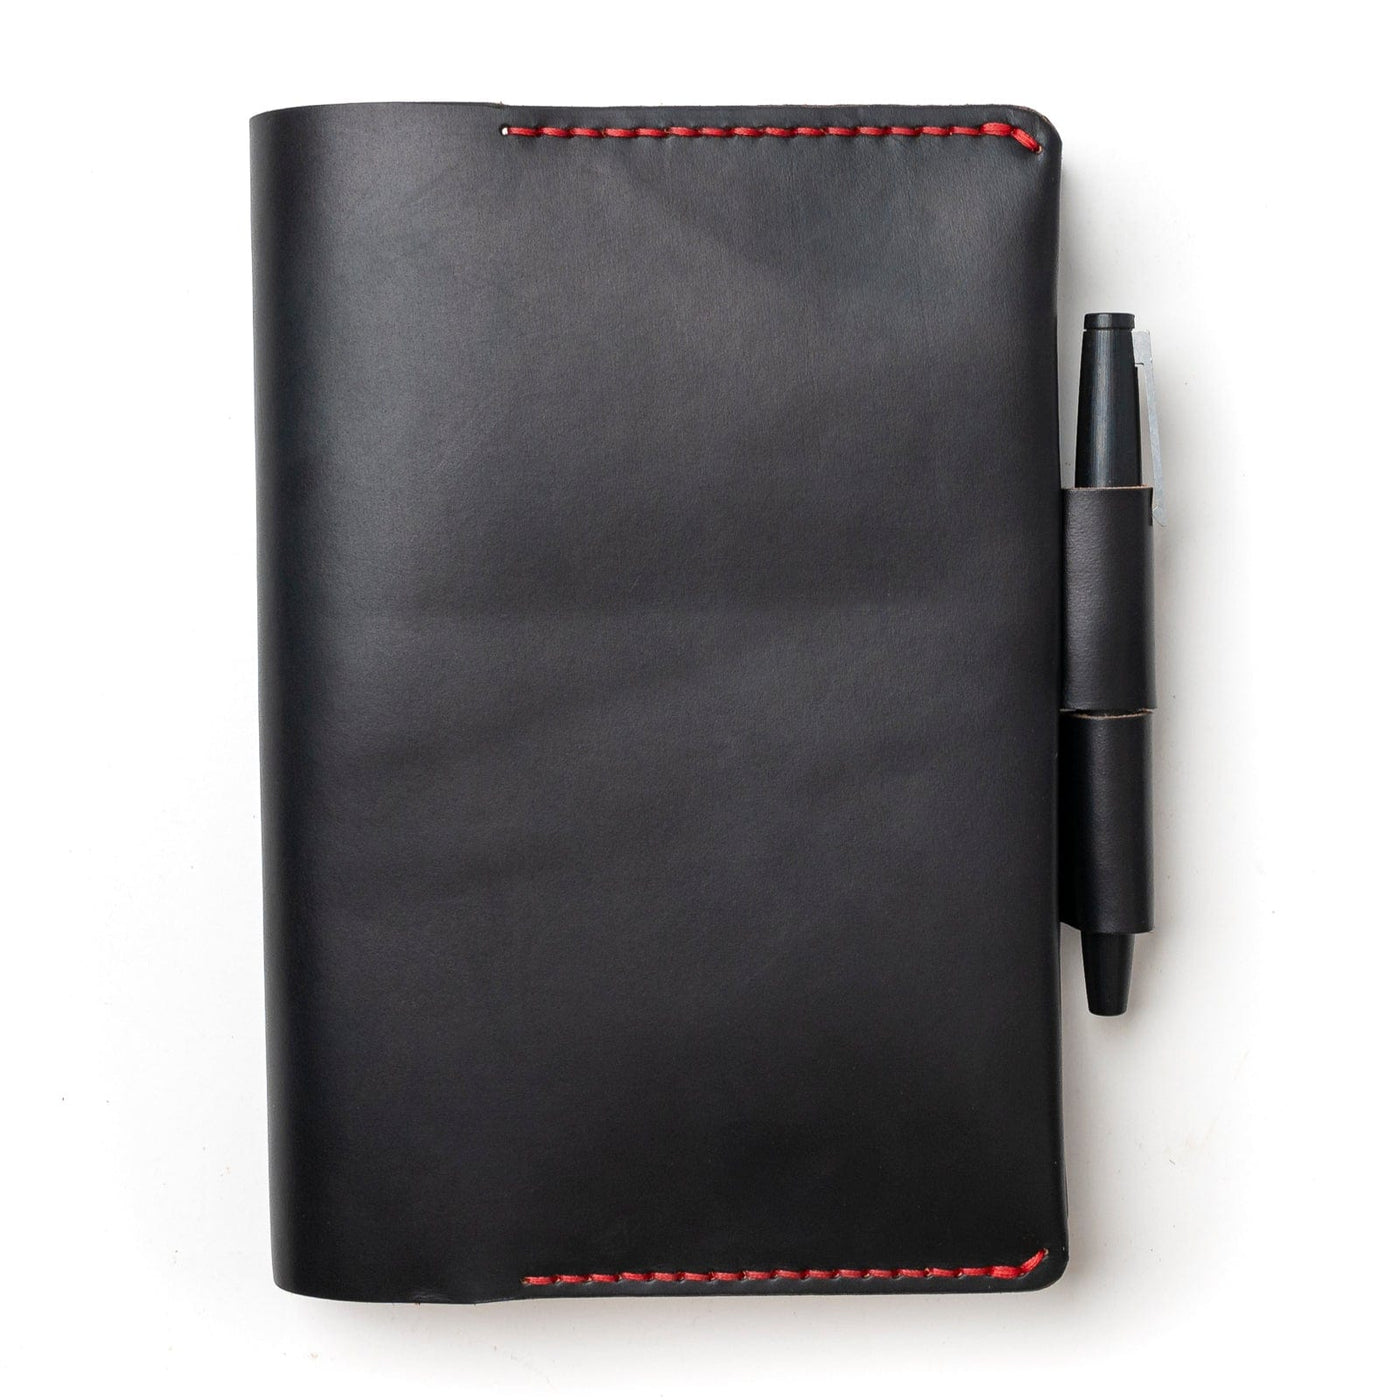 Leather Leuchtturm1917 A5 Notebook Cover - Black Popov Leather